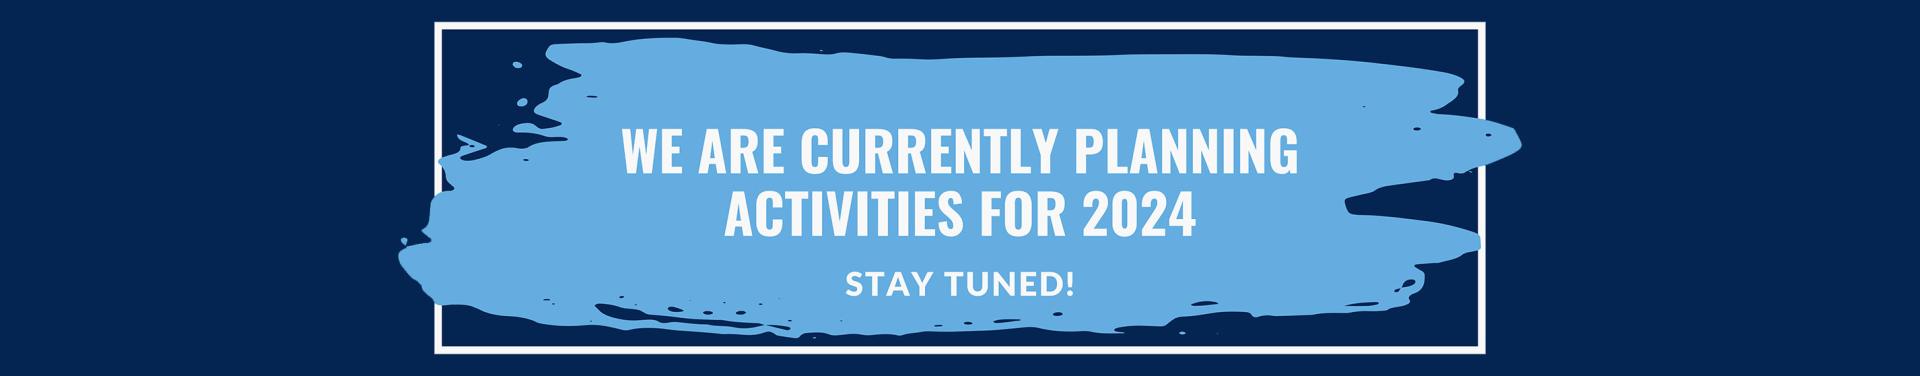 Planning activities for 2024